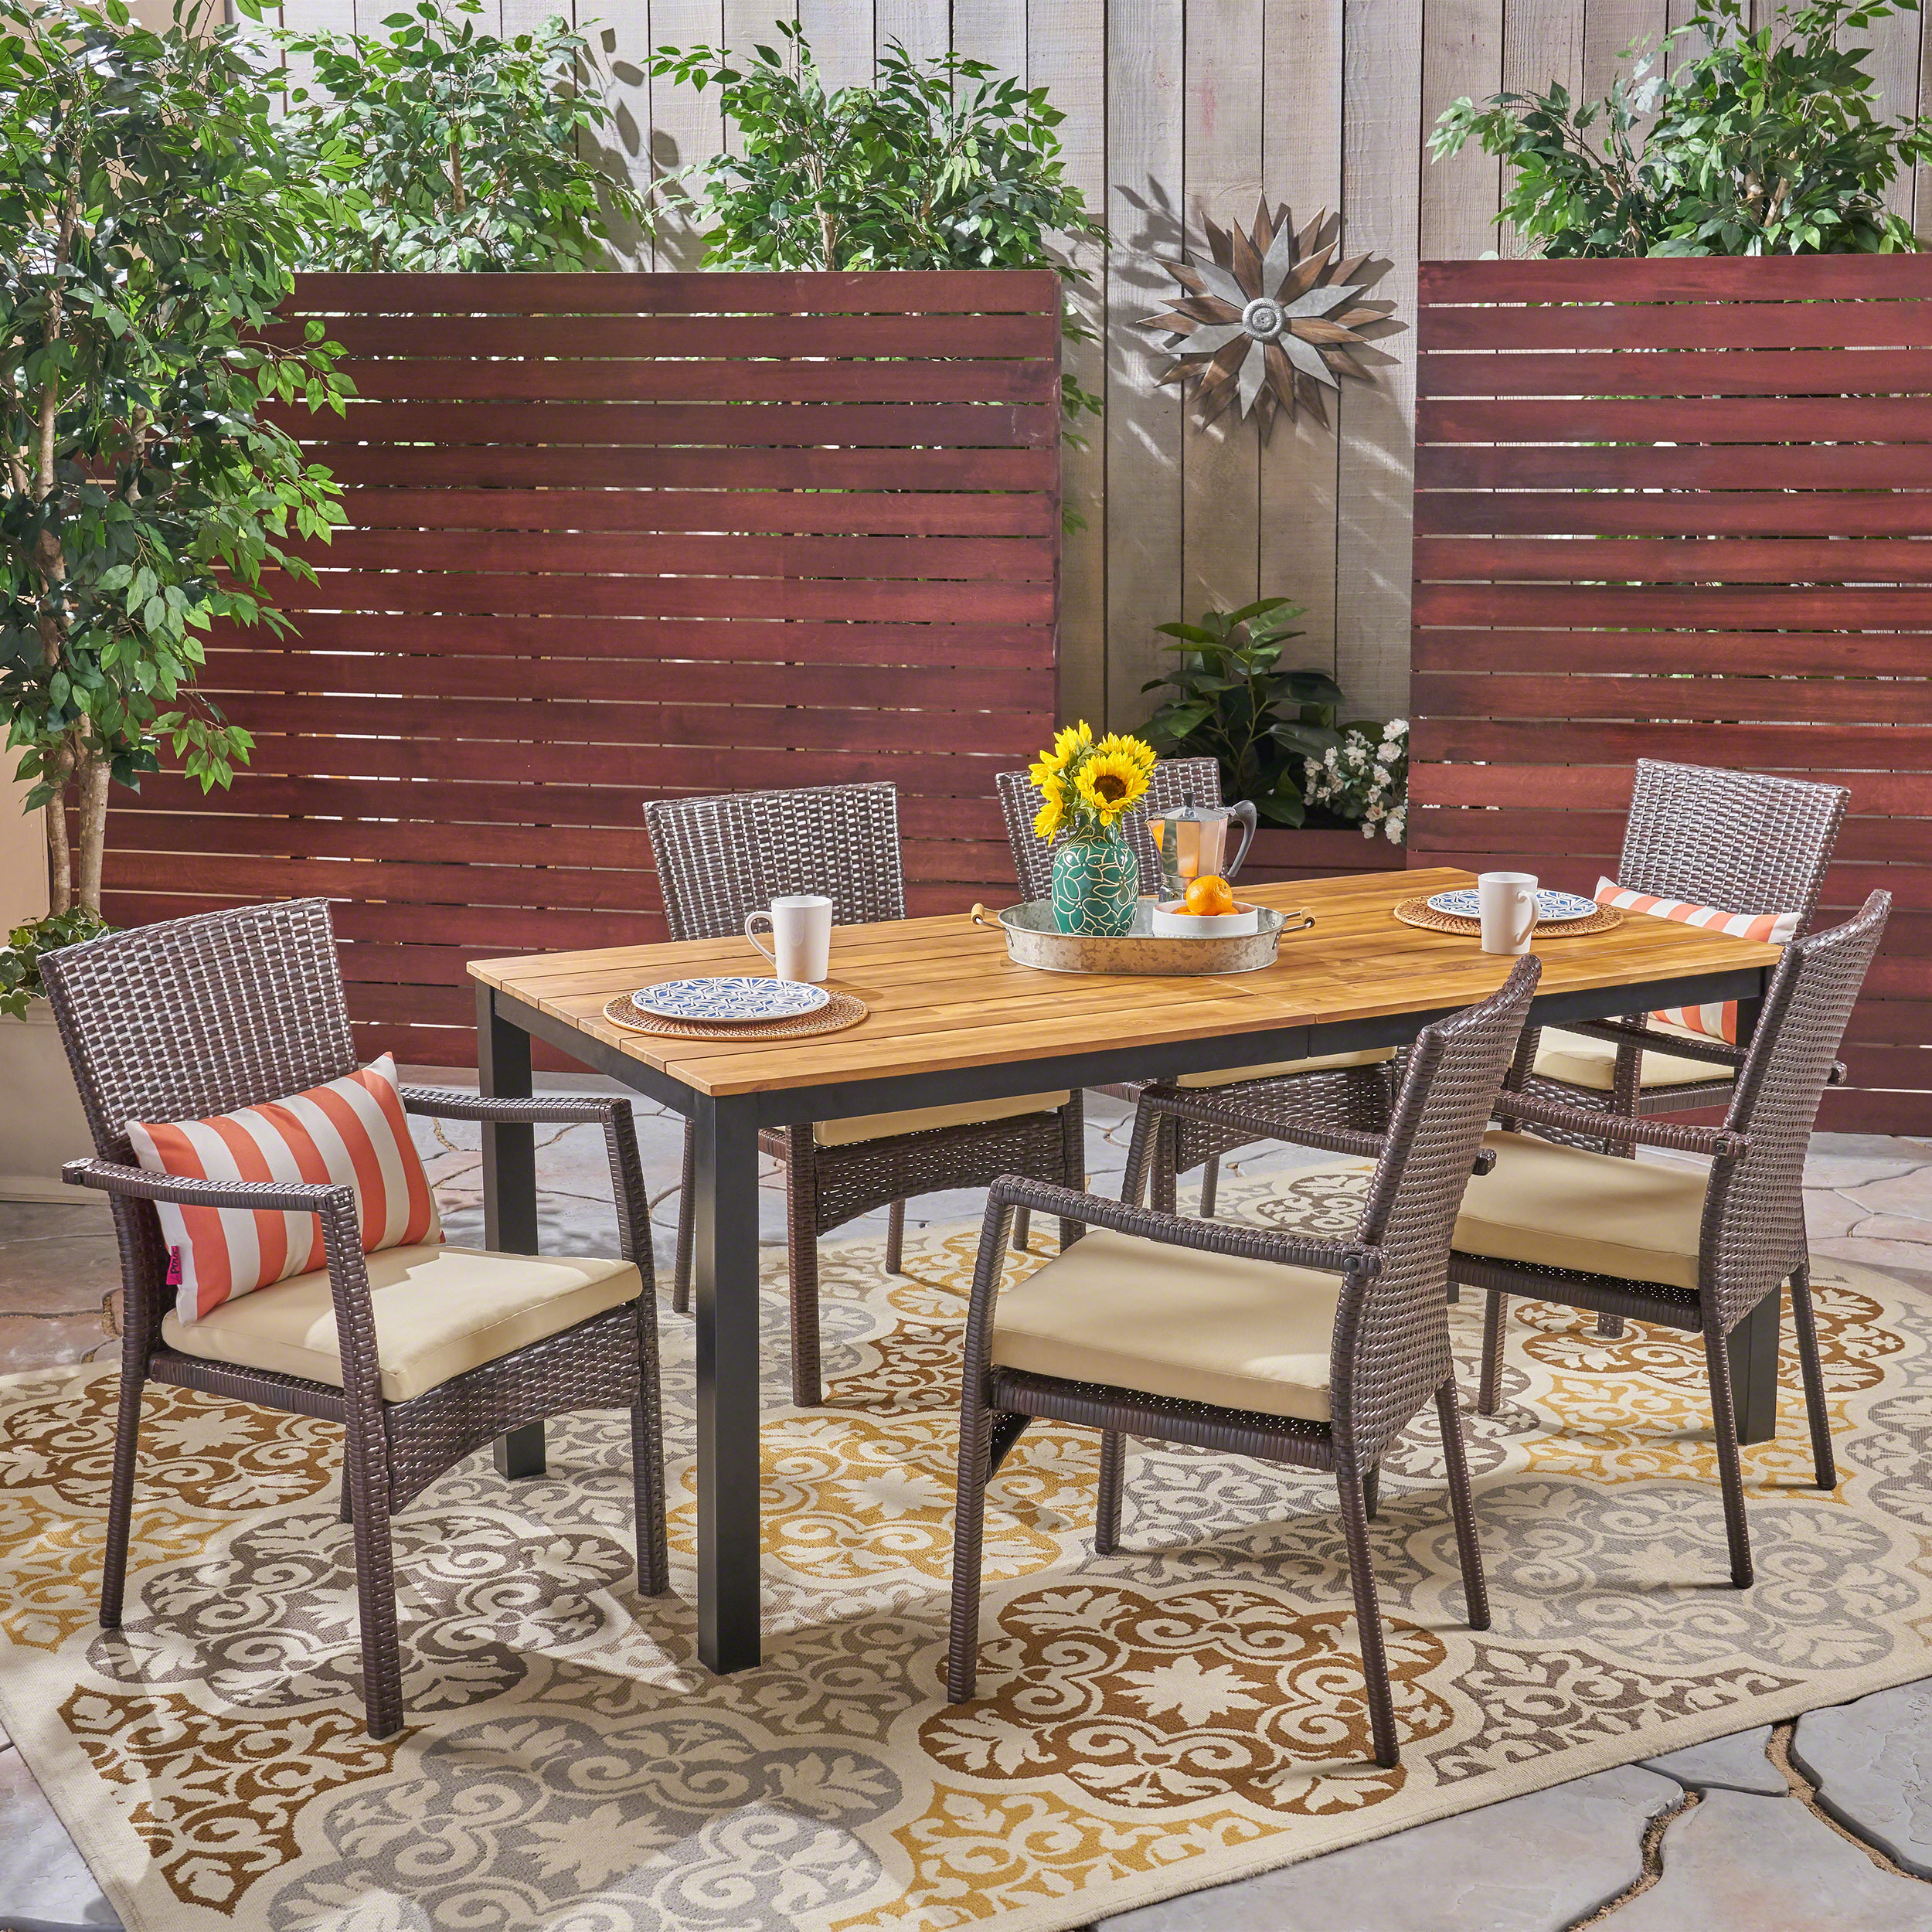 Kenia Outdoor 7 Piece Acacia Wood Dining Set with Wicker Chairs, Brown, Teak, Cream - image 1 of 6